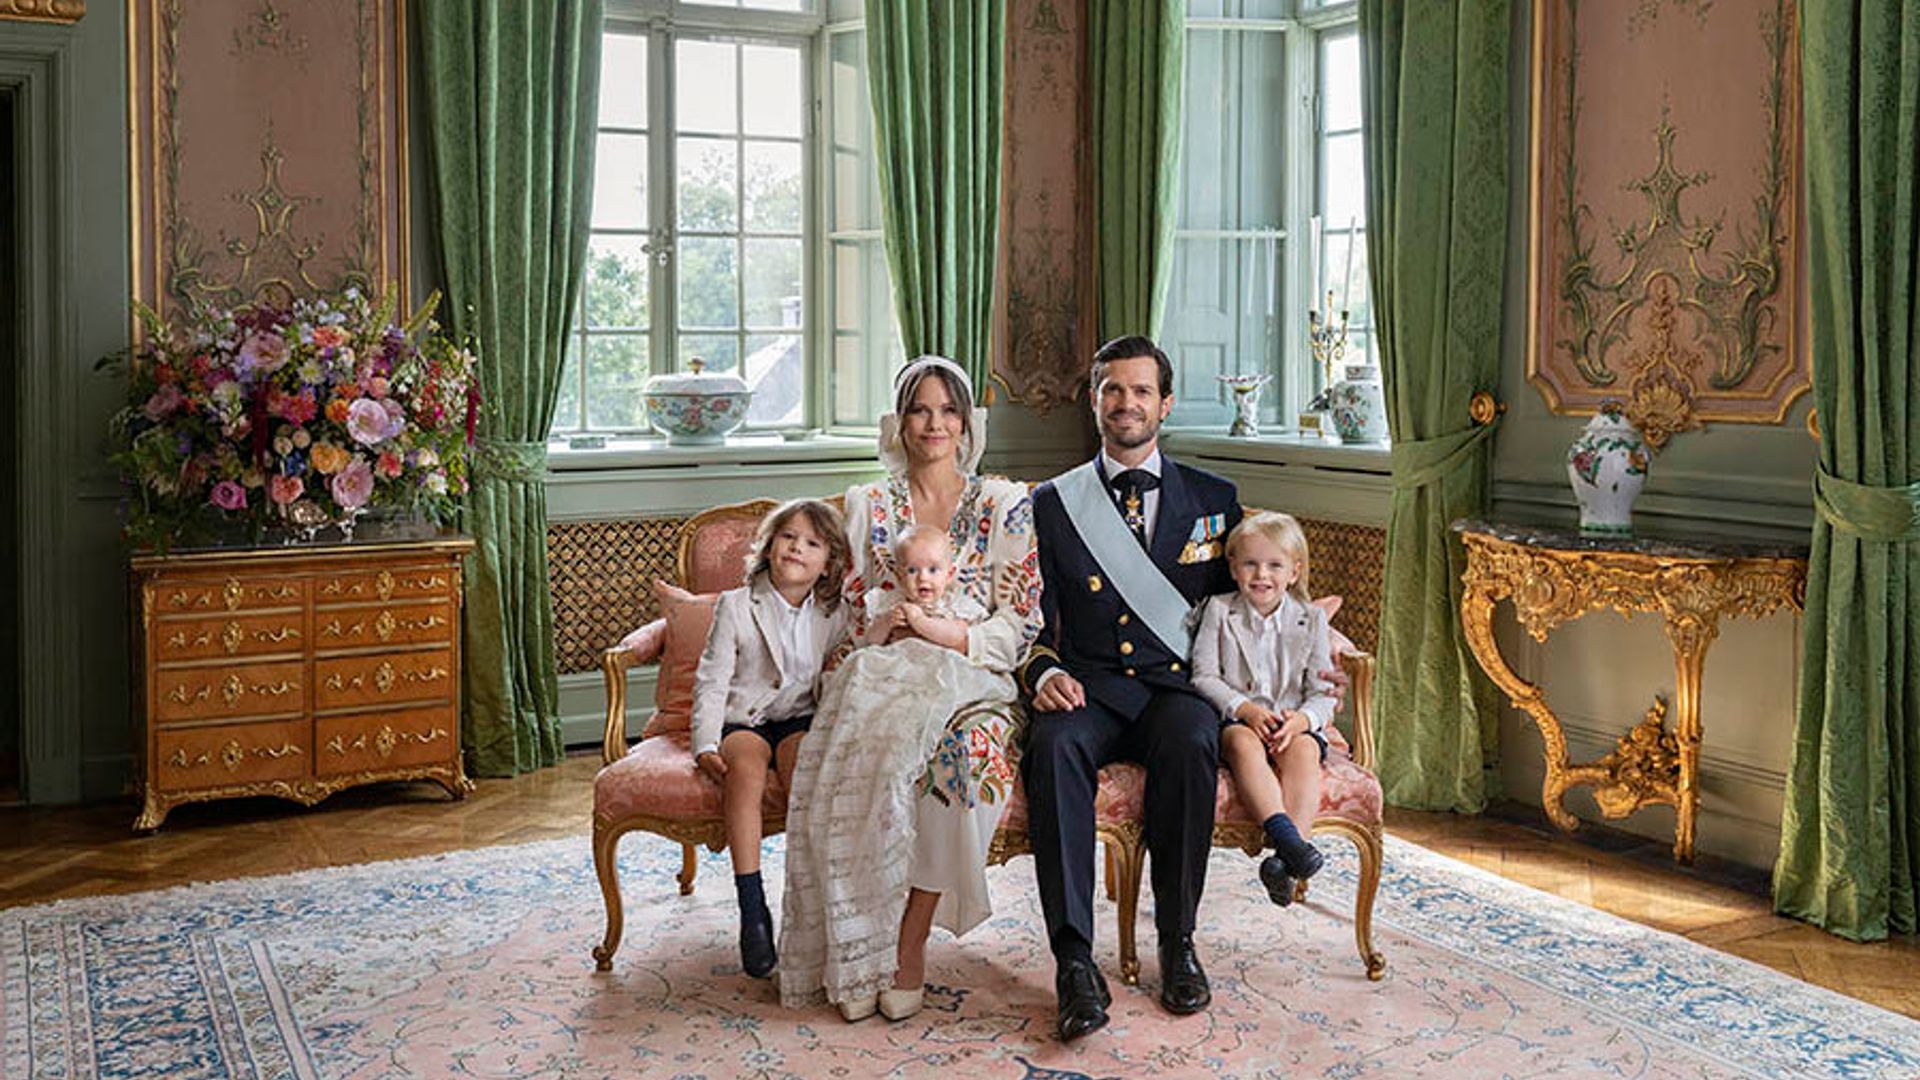 Princess Sofia, Prince Carl Philip and their sons look so happy in Prince Julian's christening photos